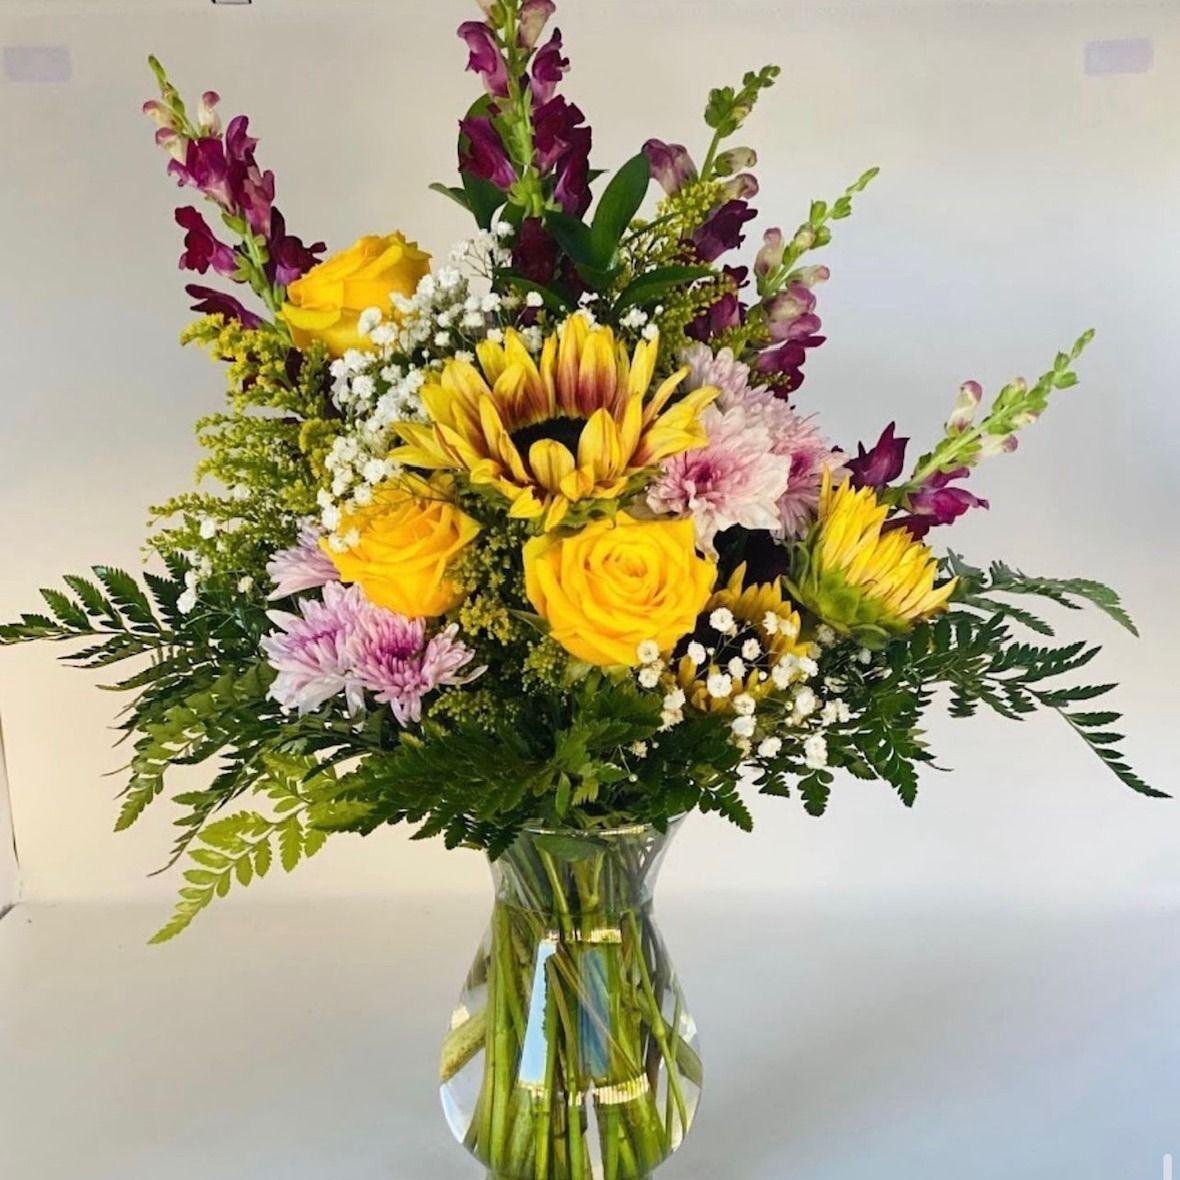 Open Fields Flower Bouquet - Vacation Delivery Service - Flowers